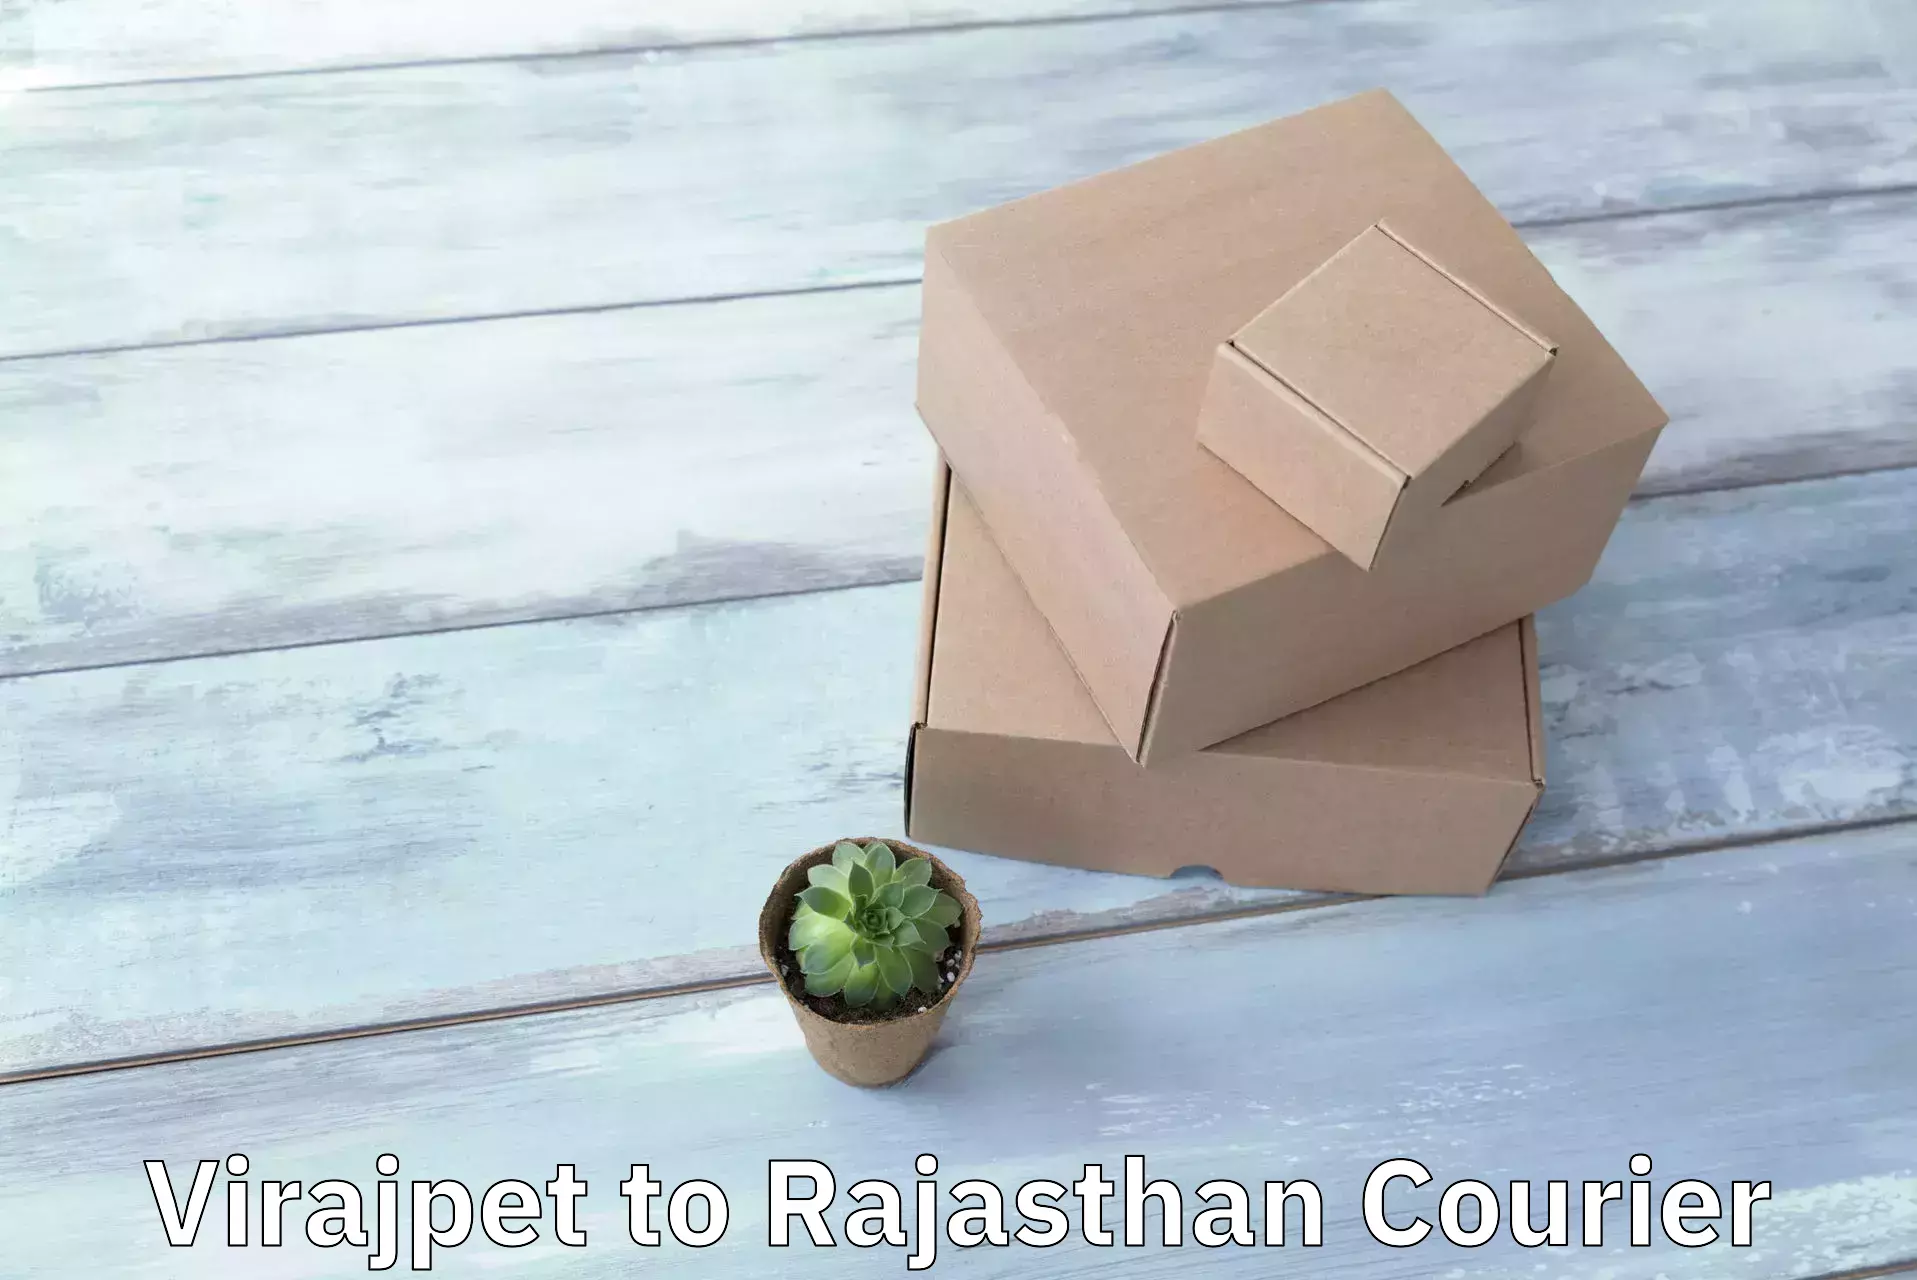 Express package services Virajpet to Rajasthan